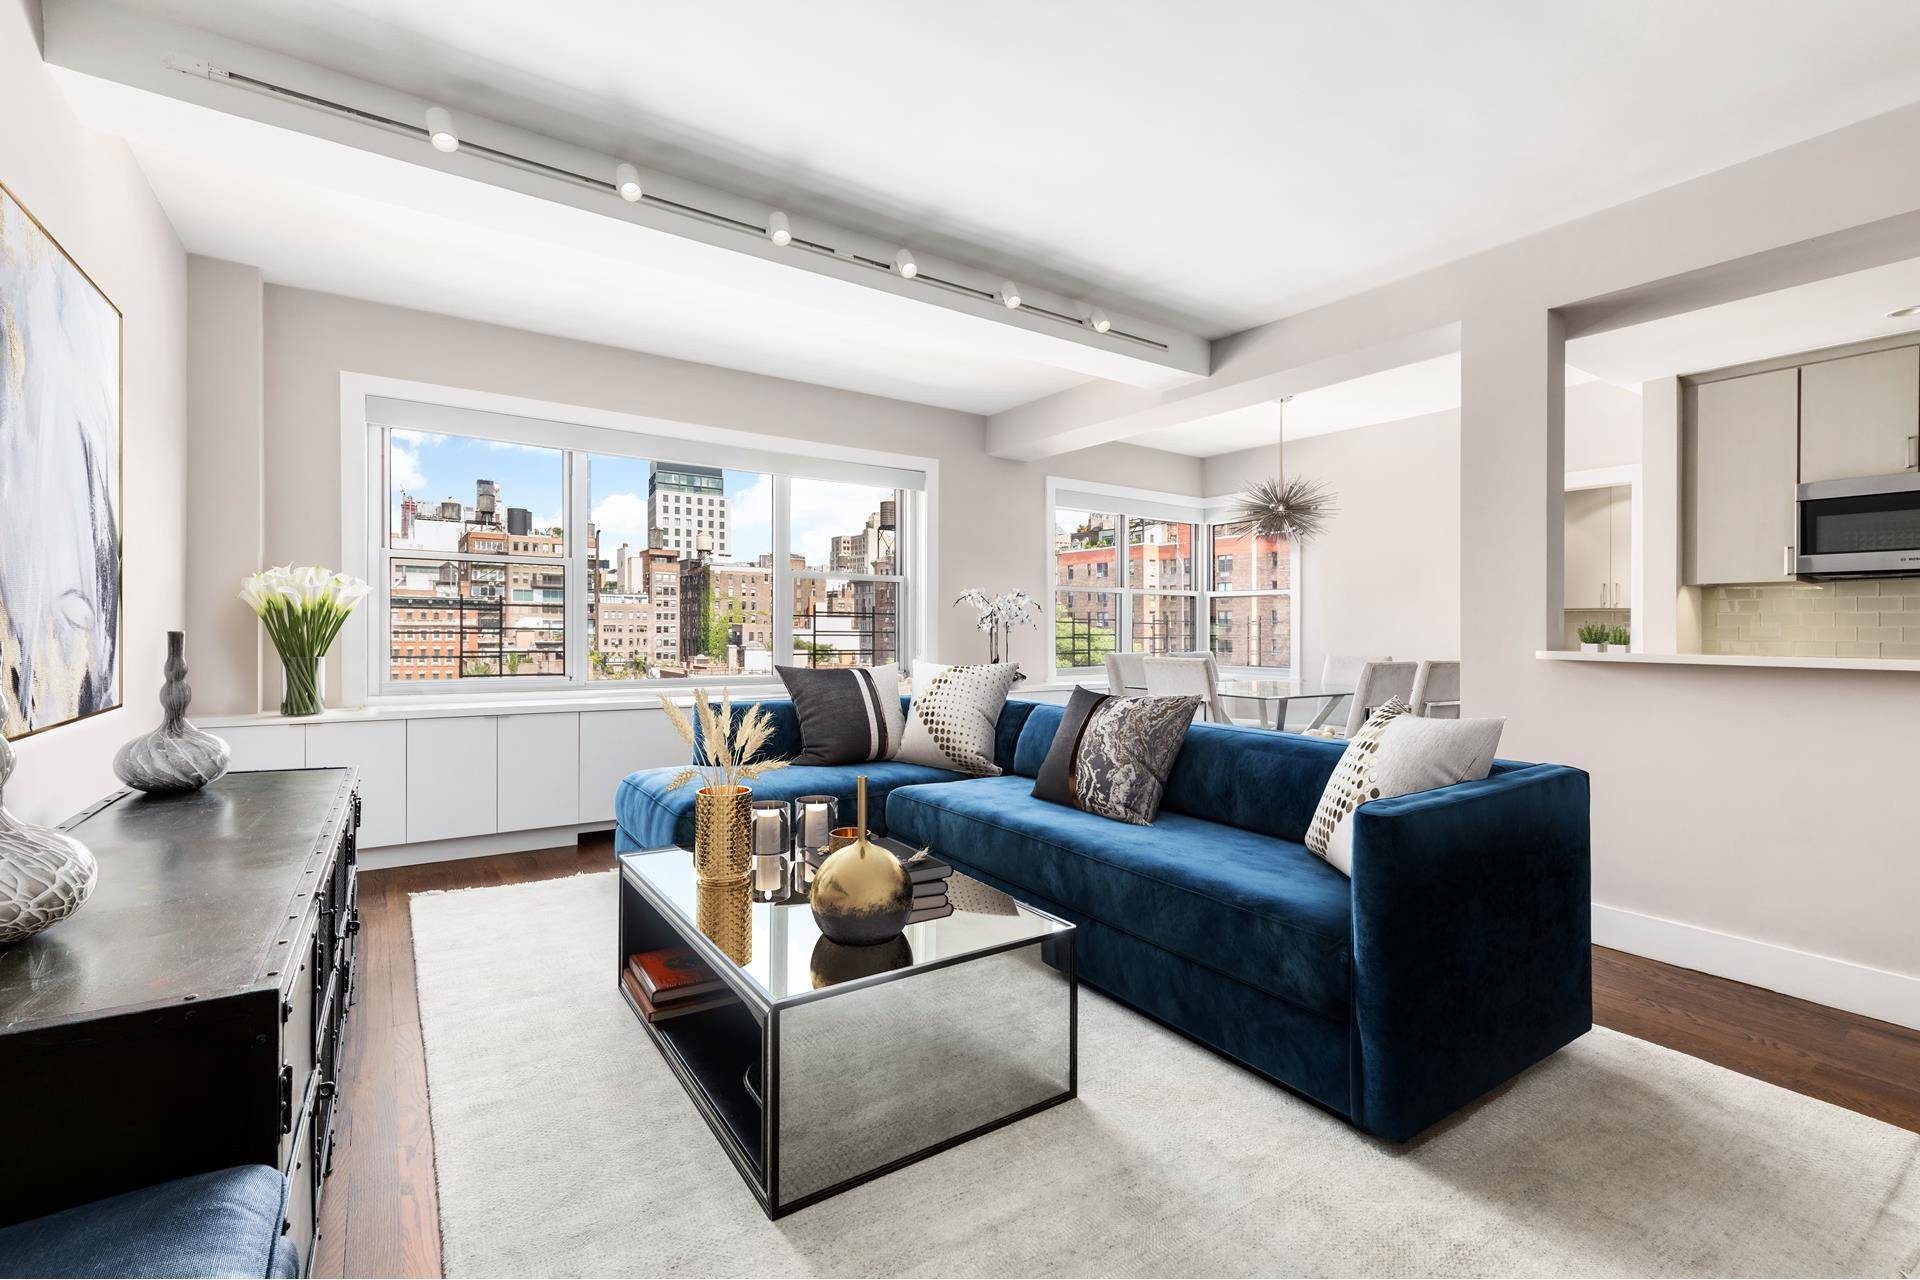 Welcome to this beautifully renovated 3 bedroom, 3 bathroom residence at the celebrated Brevoort at 11 Fifth Avenue, situated on coveted lower Fifth Avenue.